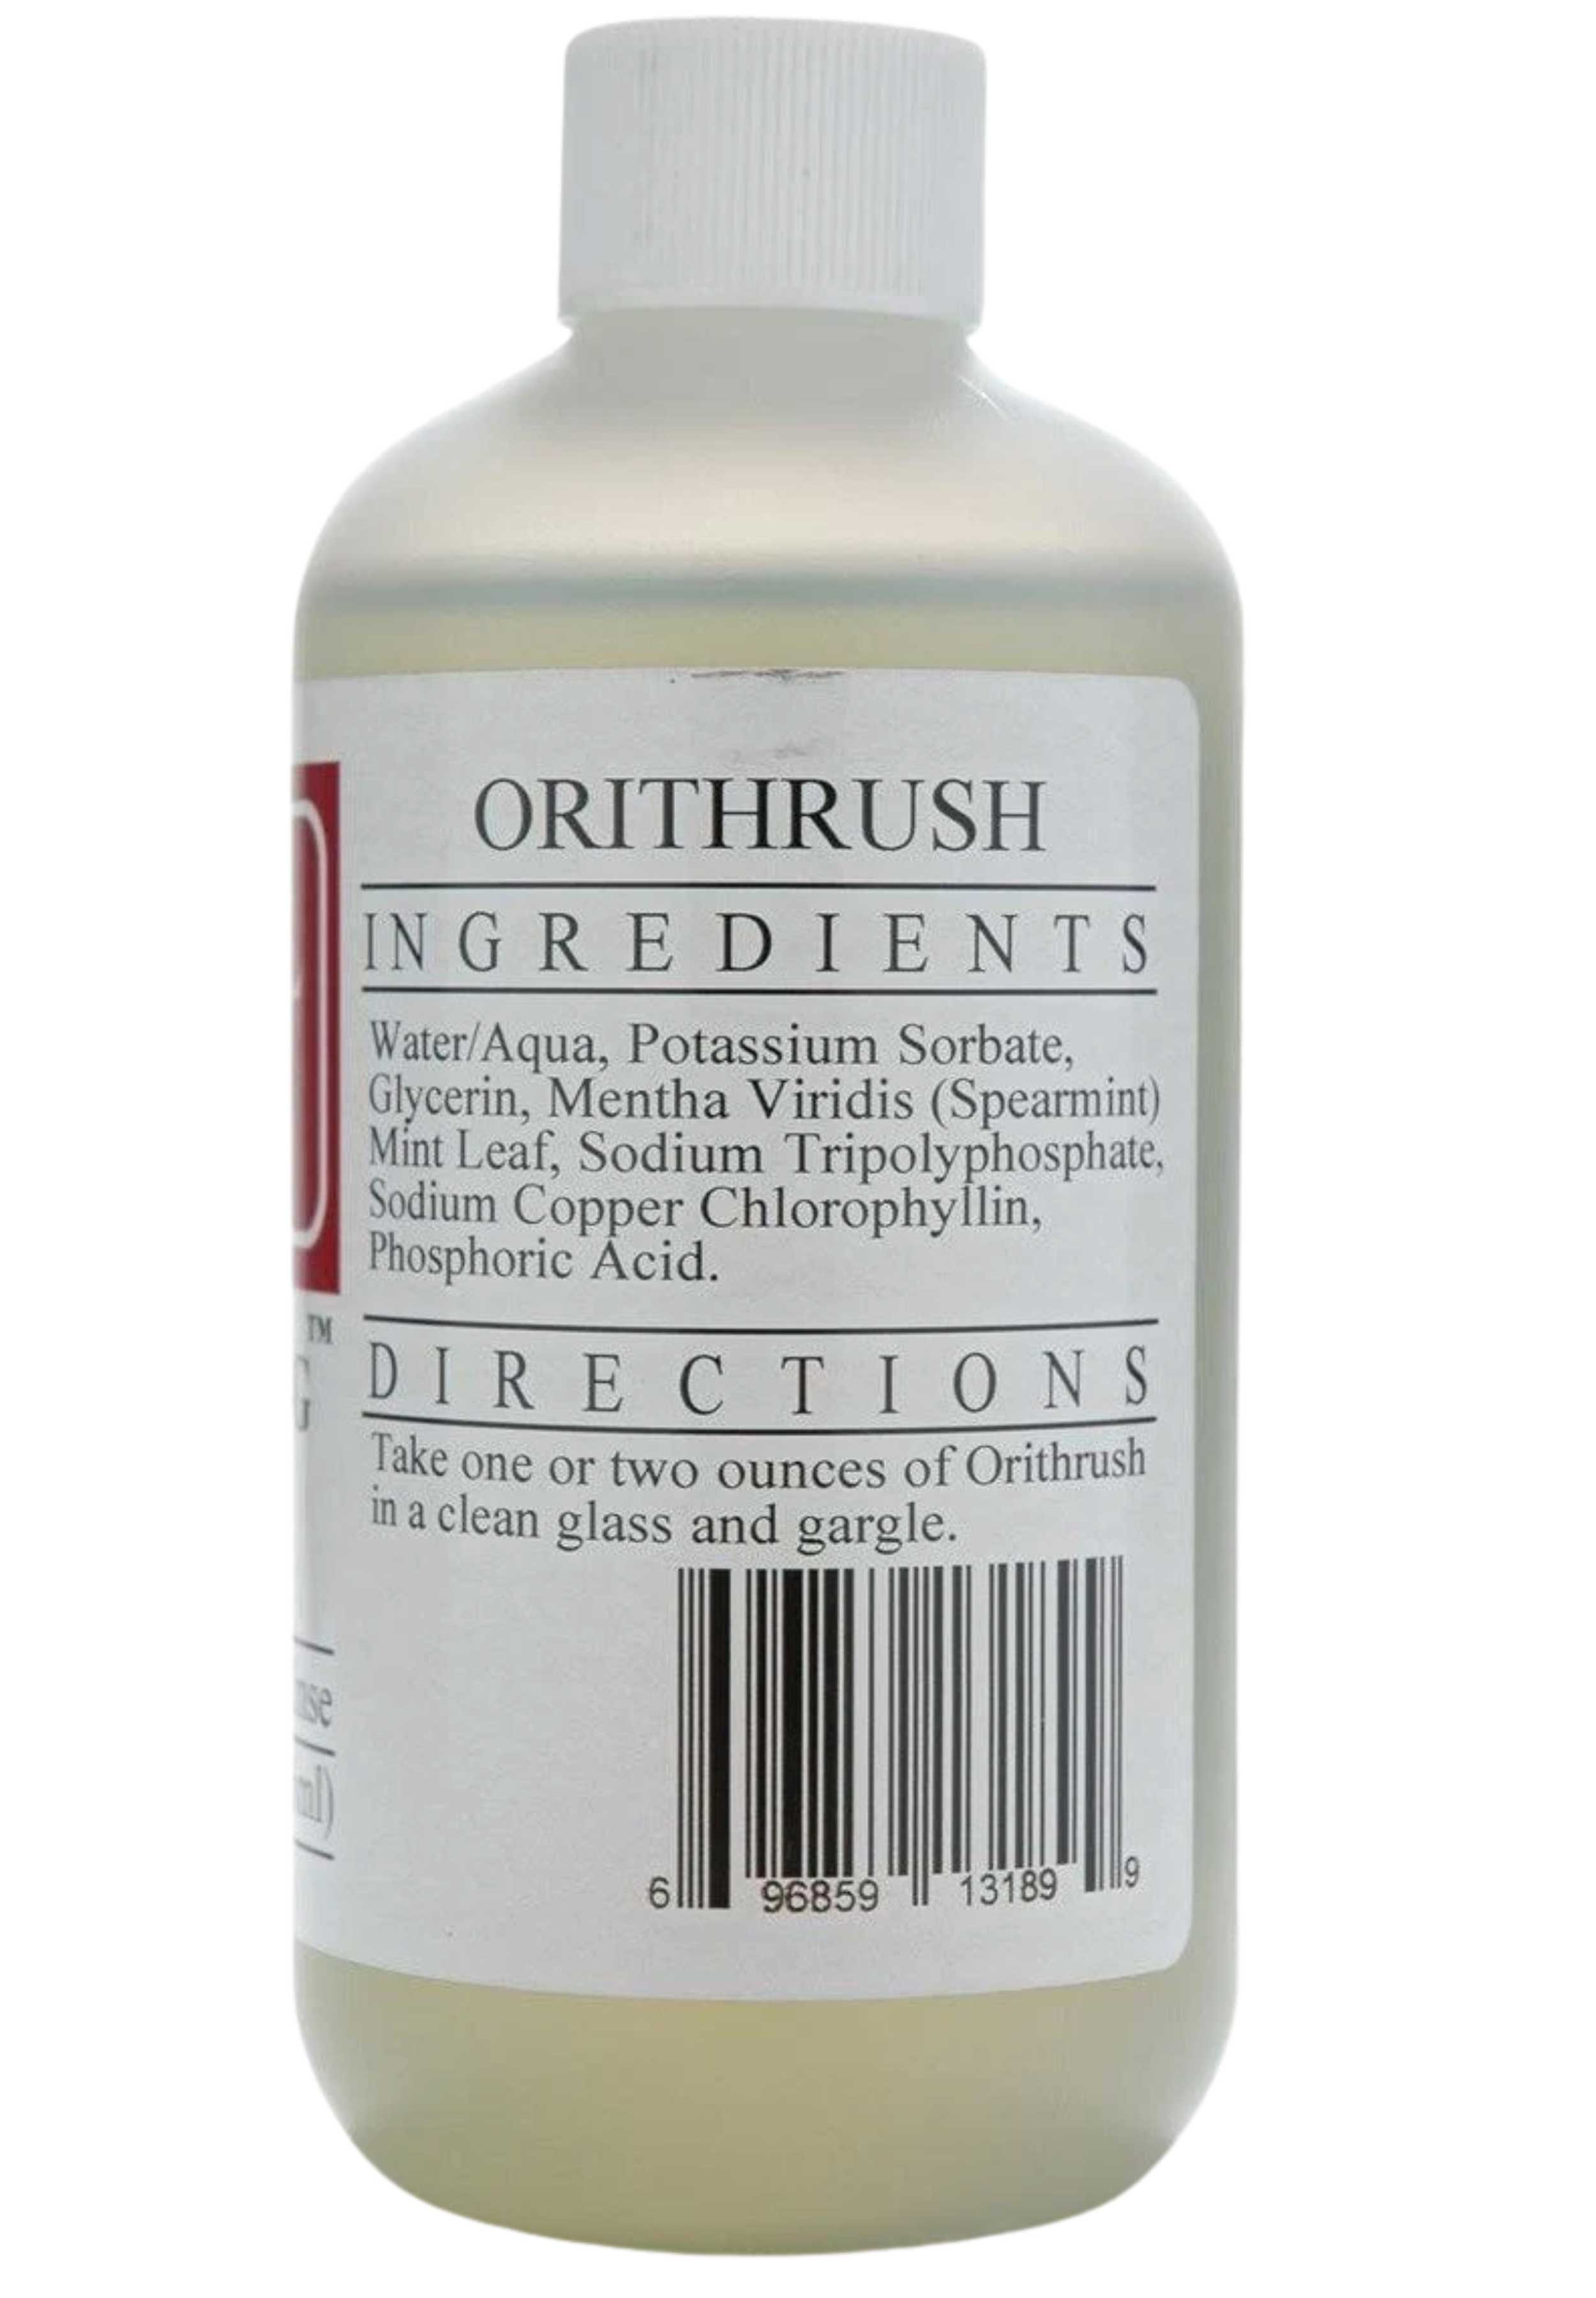 Ecological Formulas/Cardiovascular Research Orithrush-G Ingredients 